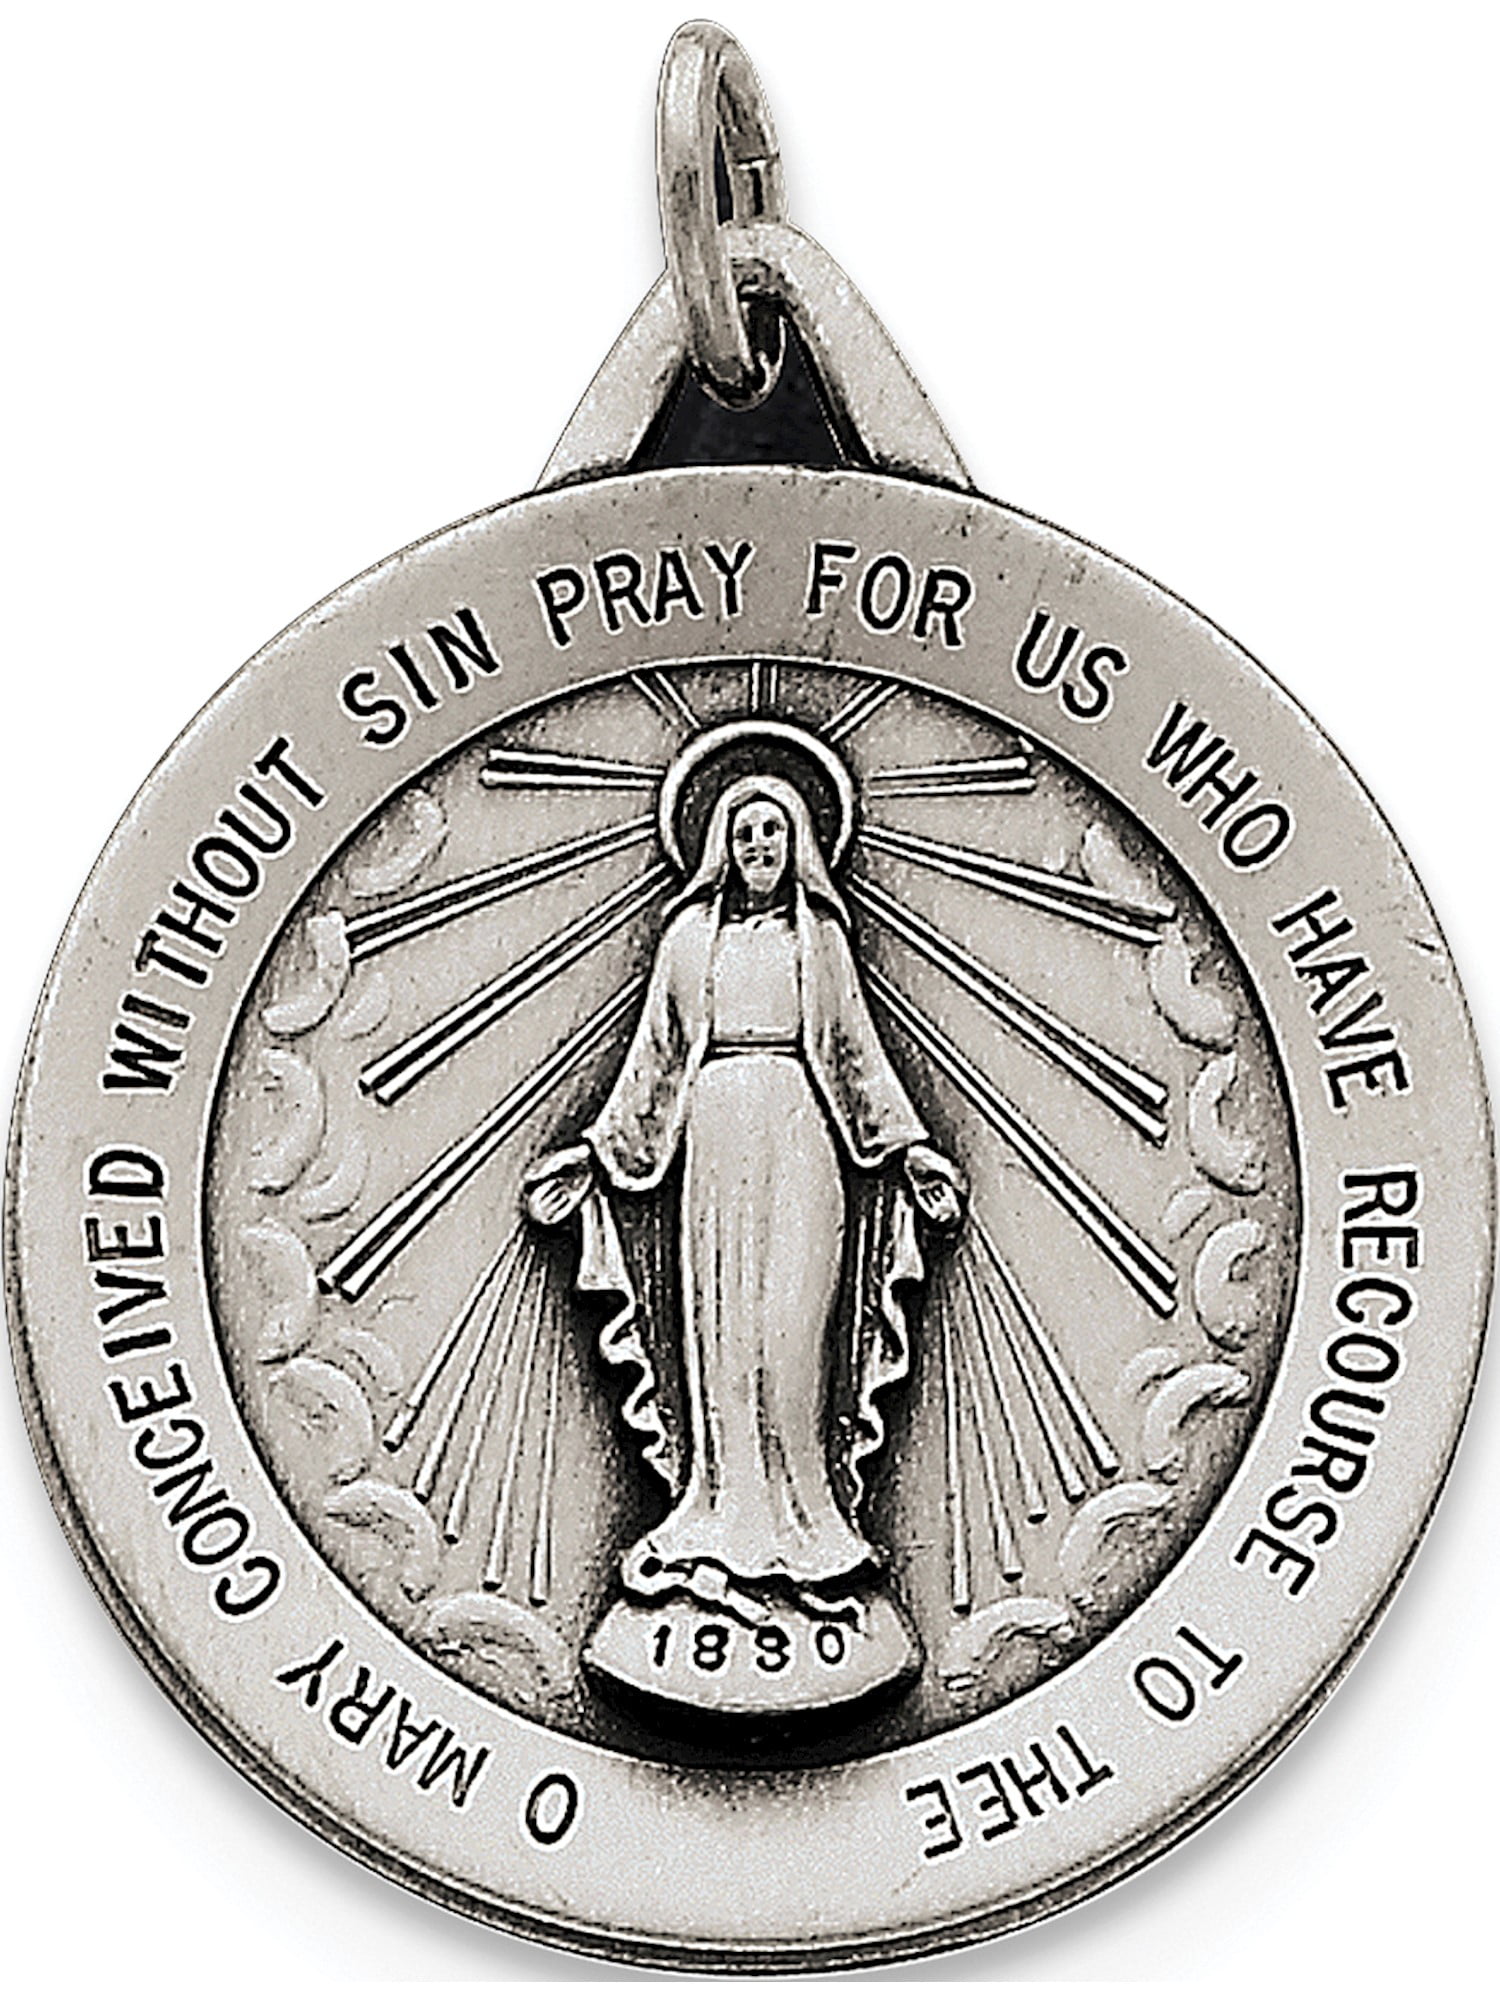 925 Sterling Silver Antiqued Miraculous Medal